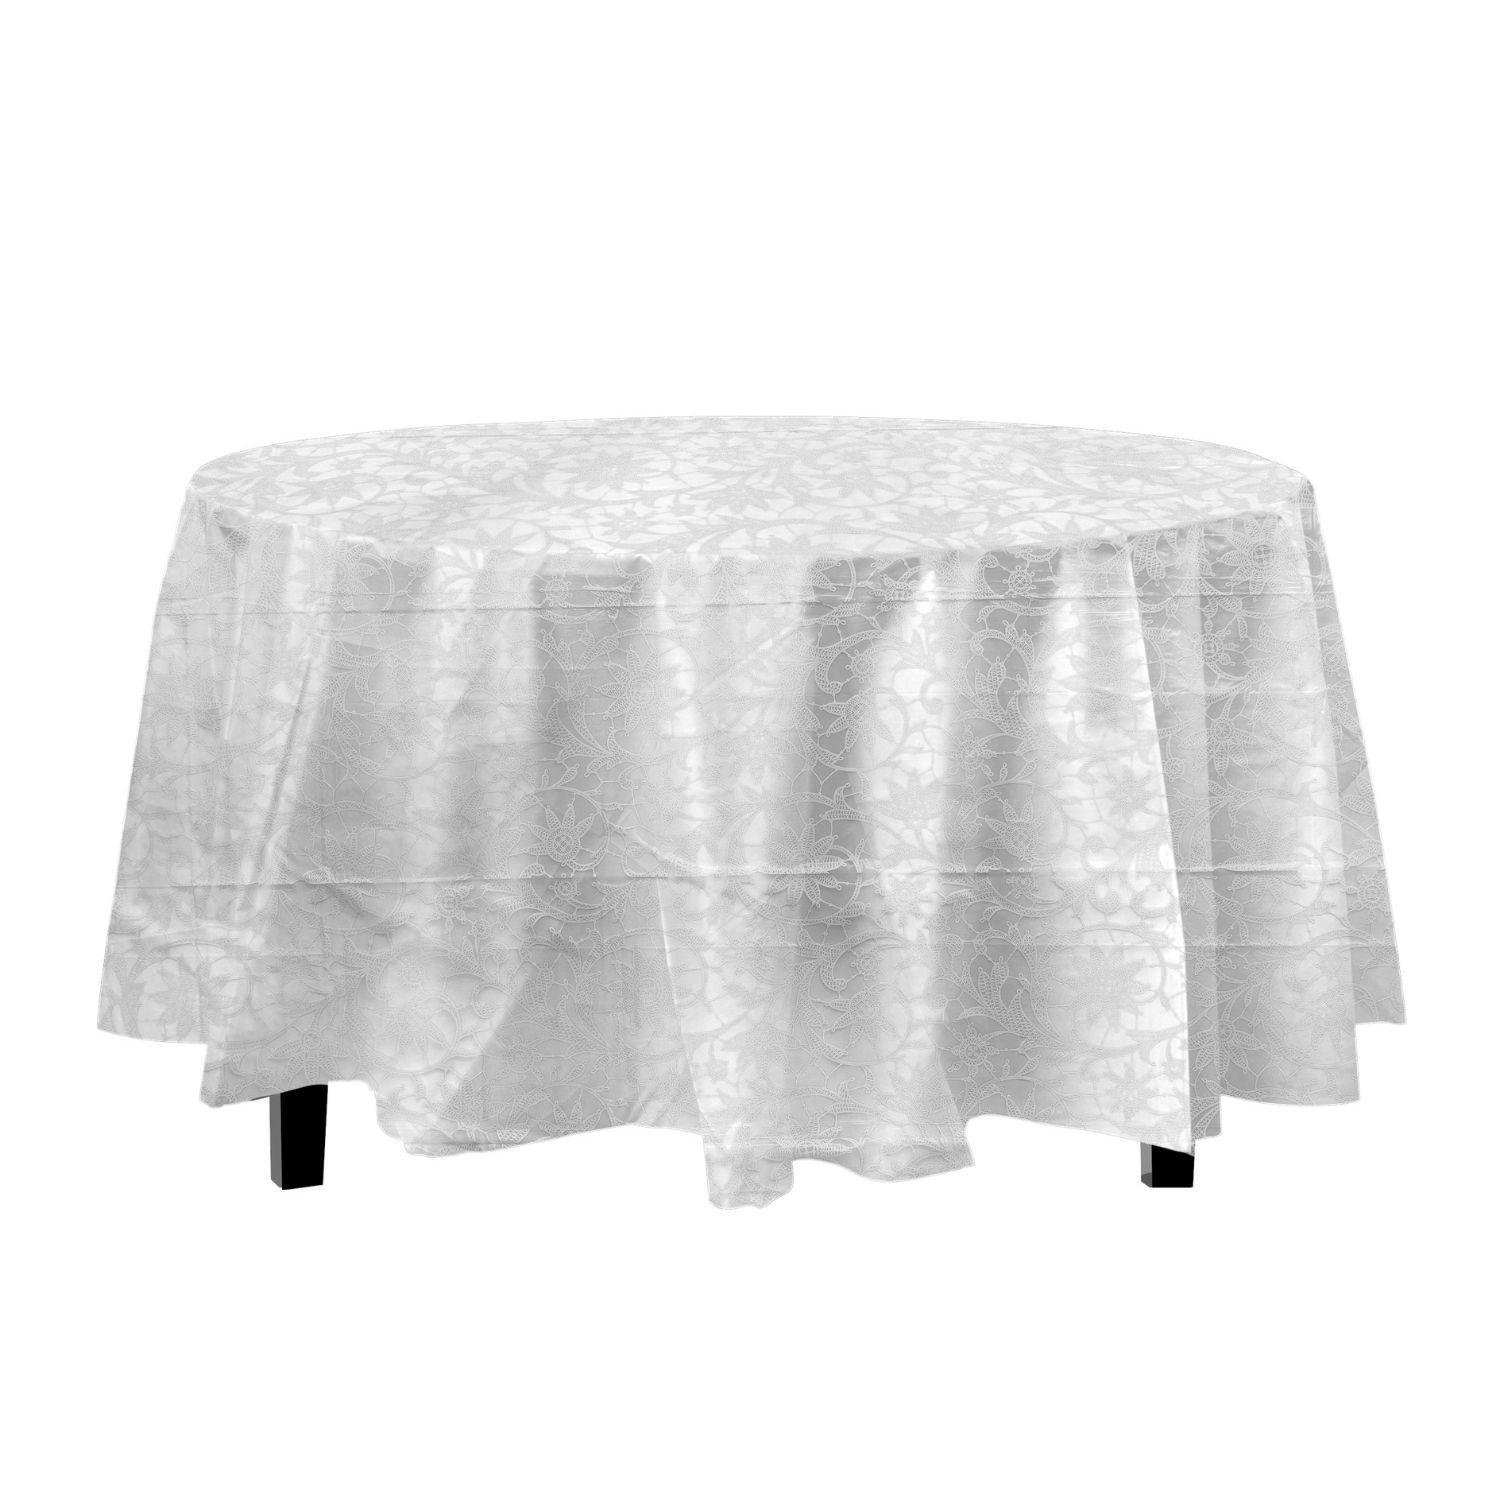 84in. Round Printed Plastic Table cover White Lace - 48 ct.